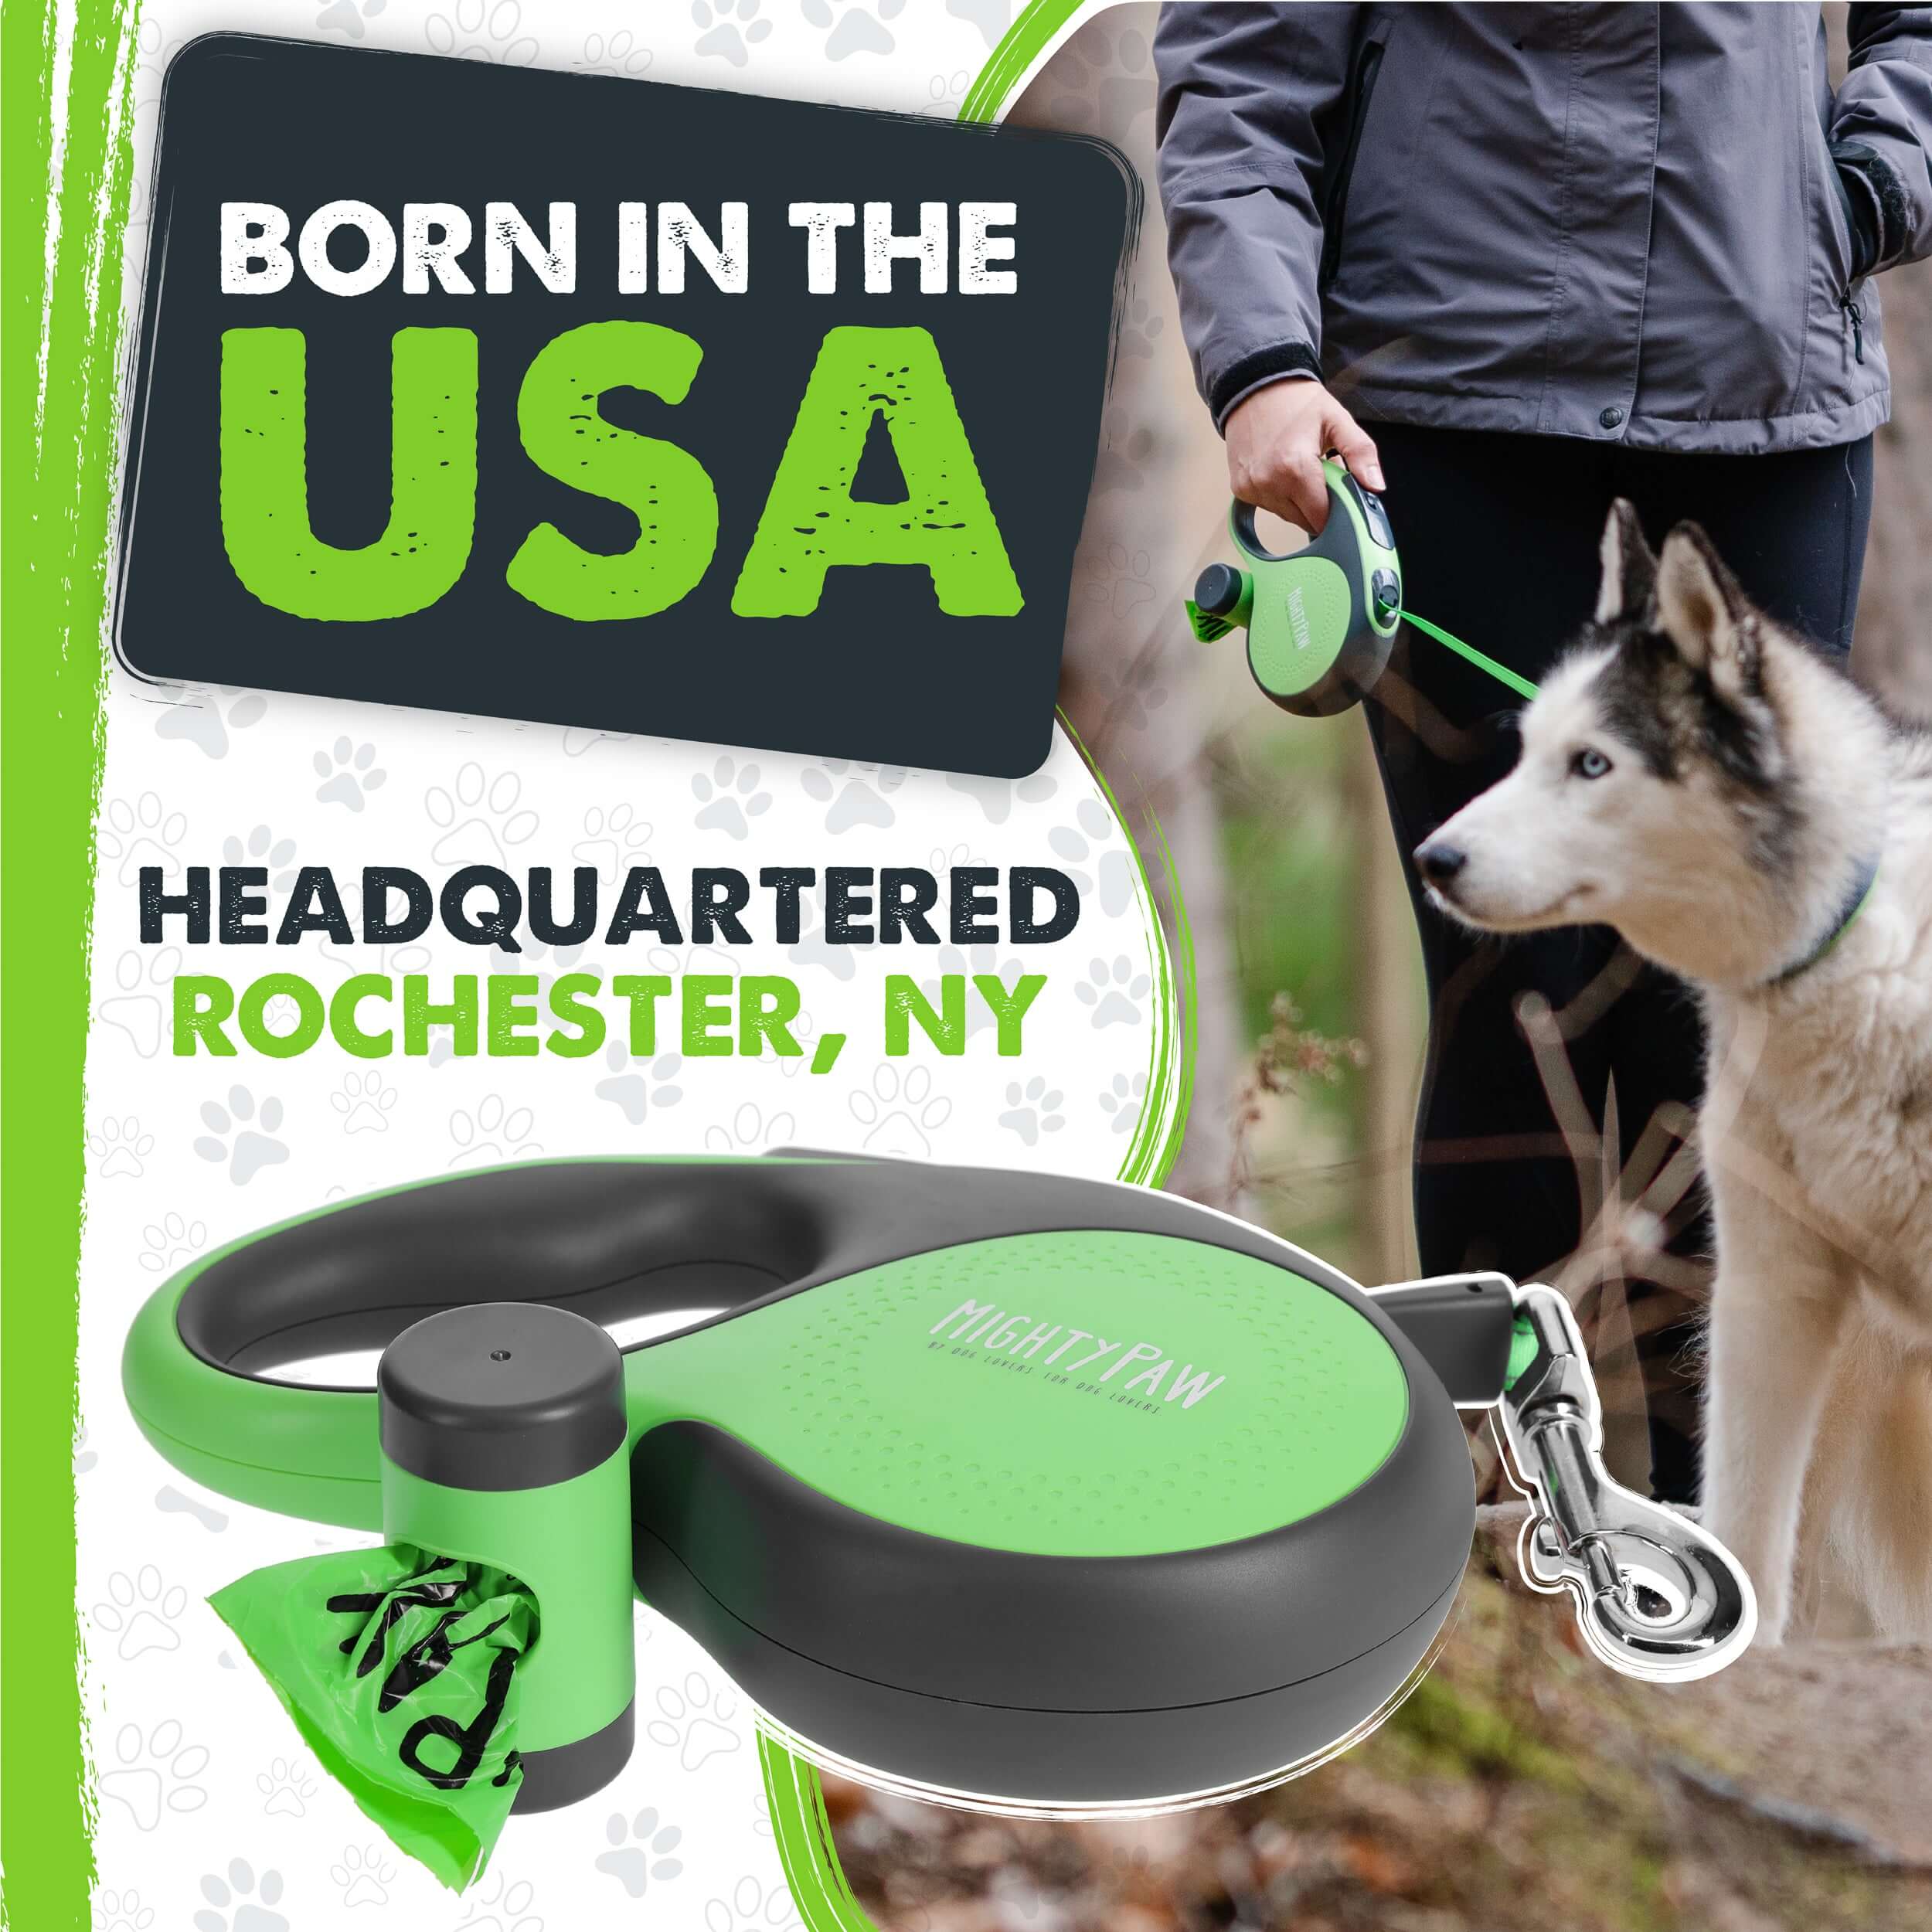 Mighty Paw Retractable Dog Leash 3.0 with Poop Bag Holder